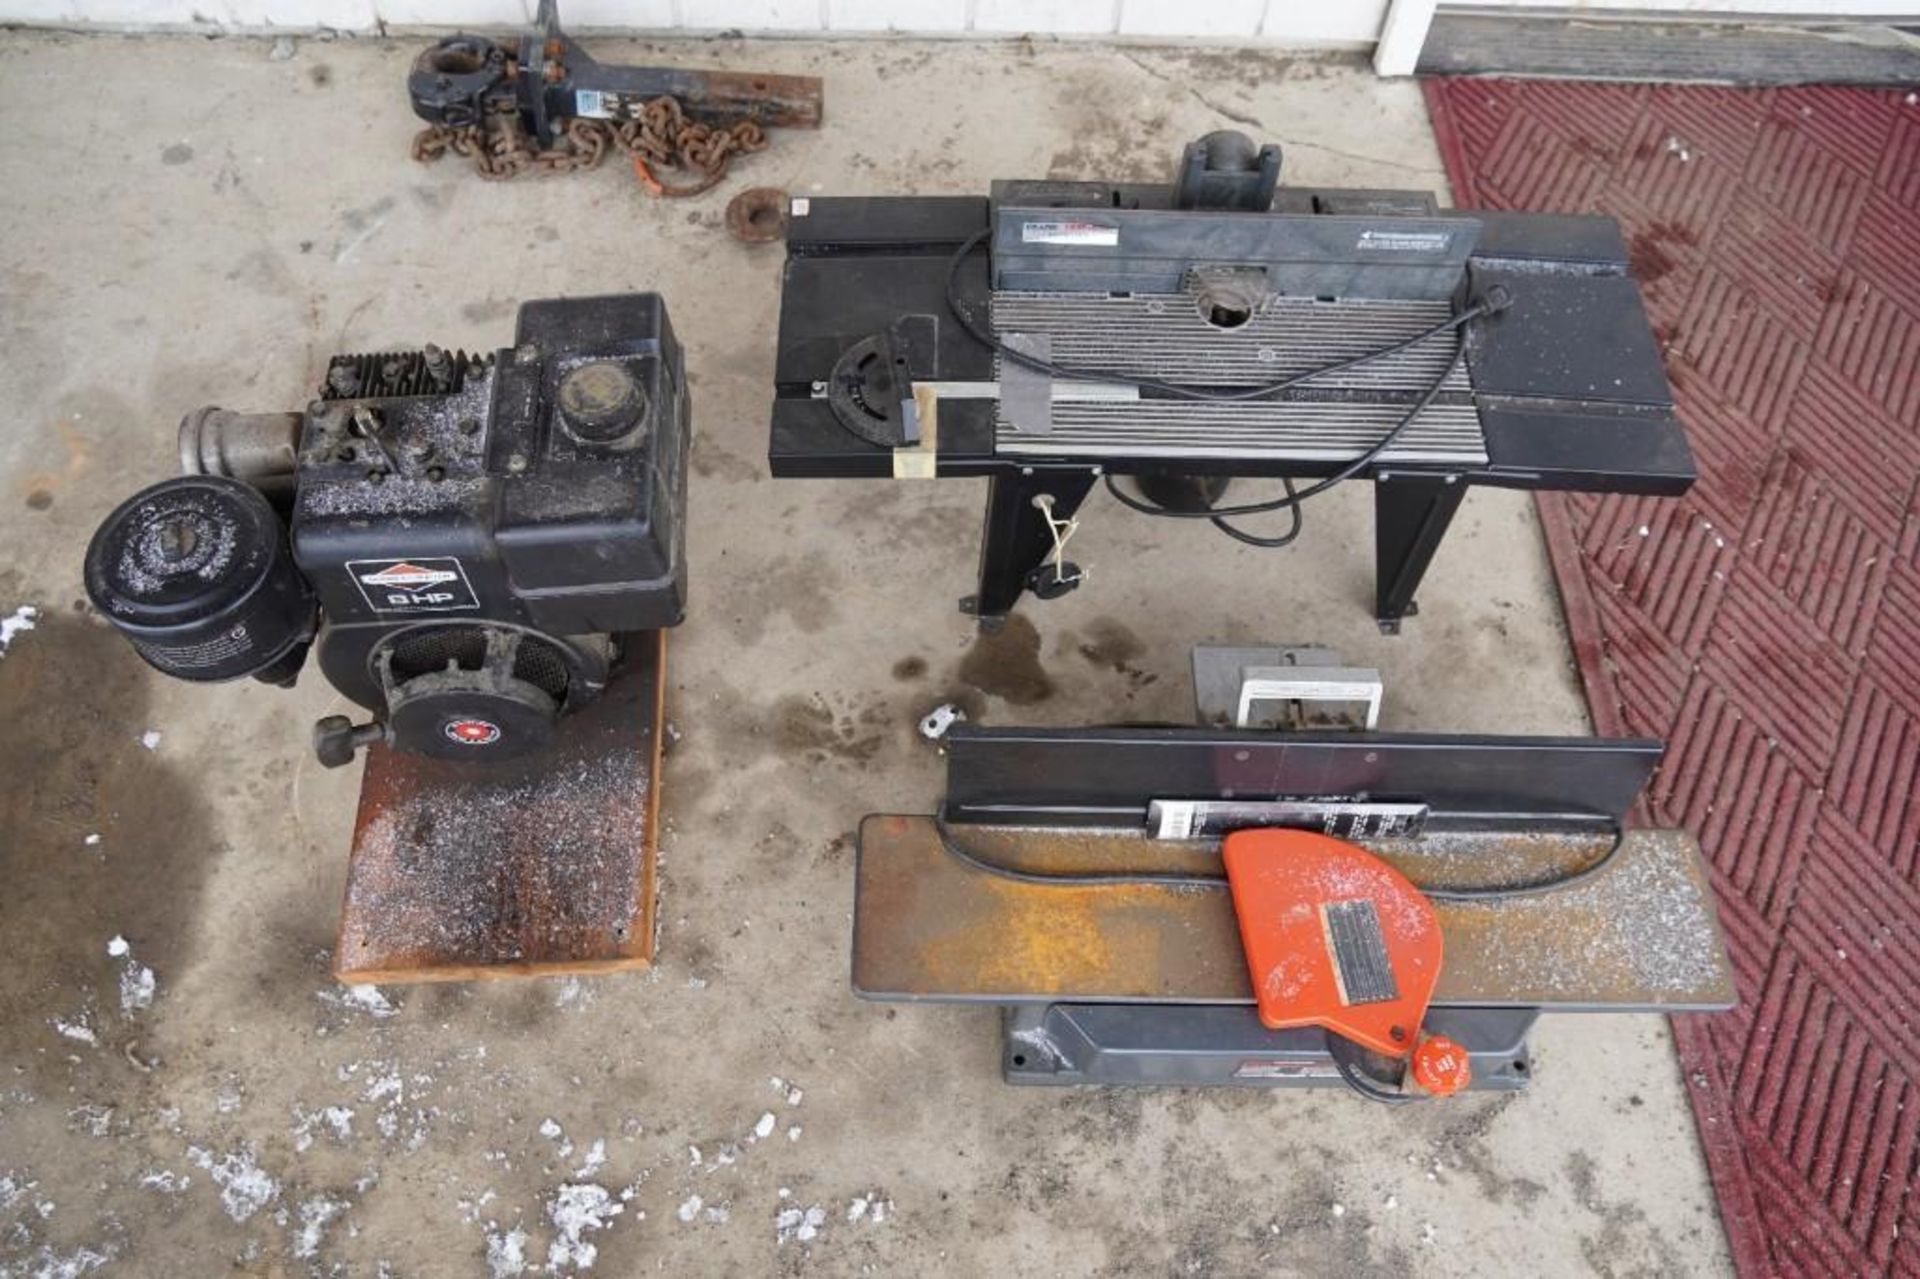 Motor, Planer, and Router